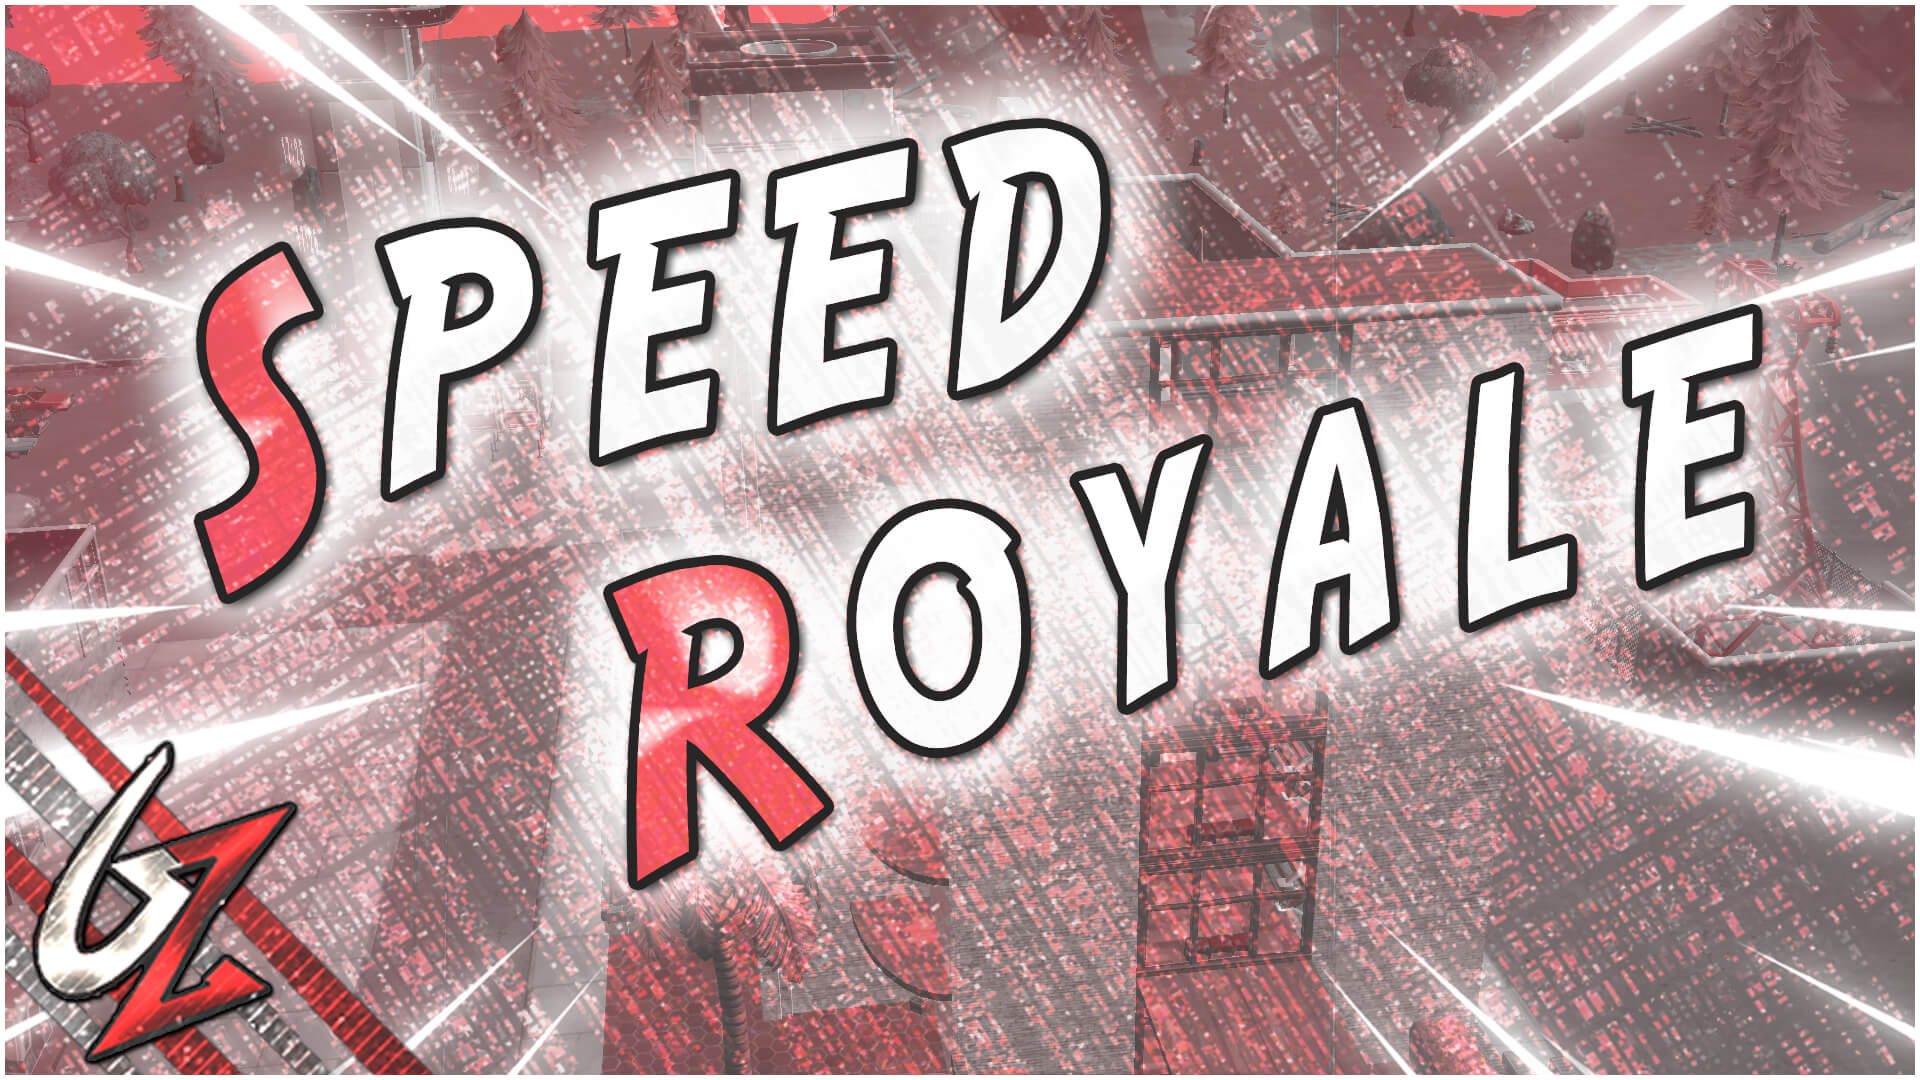 SPEED ROYALE